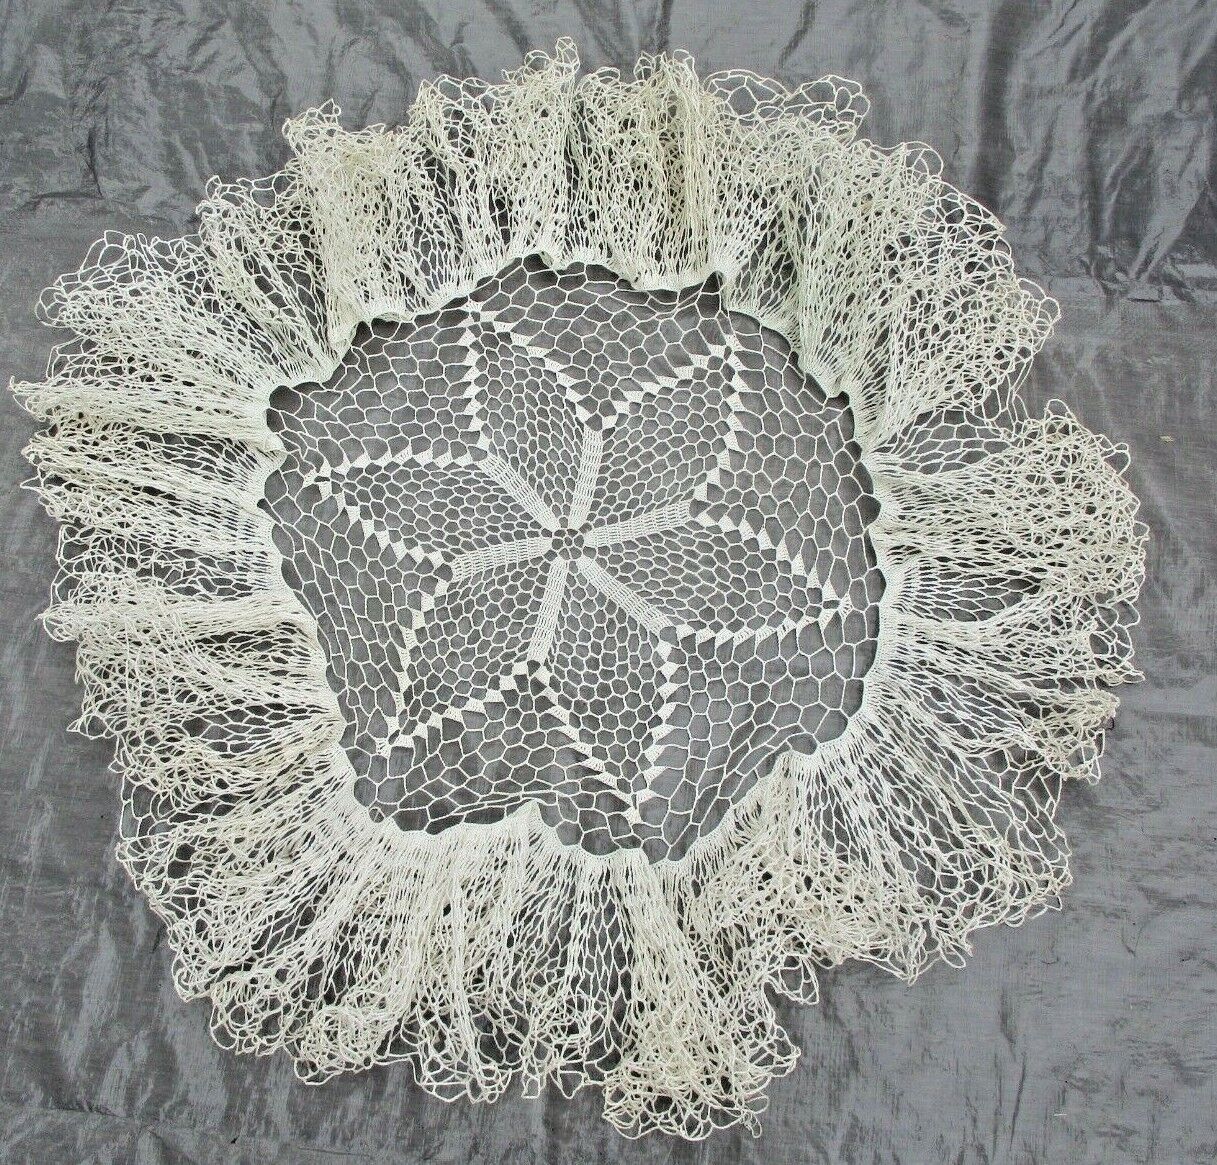 Large Vintage Doily Starched with Sugar Water